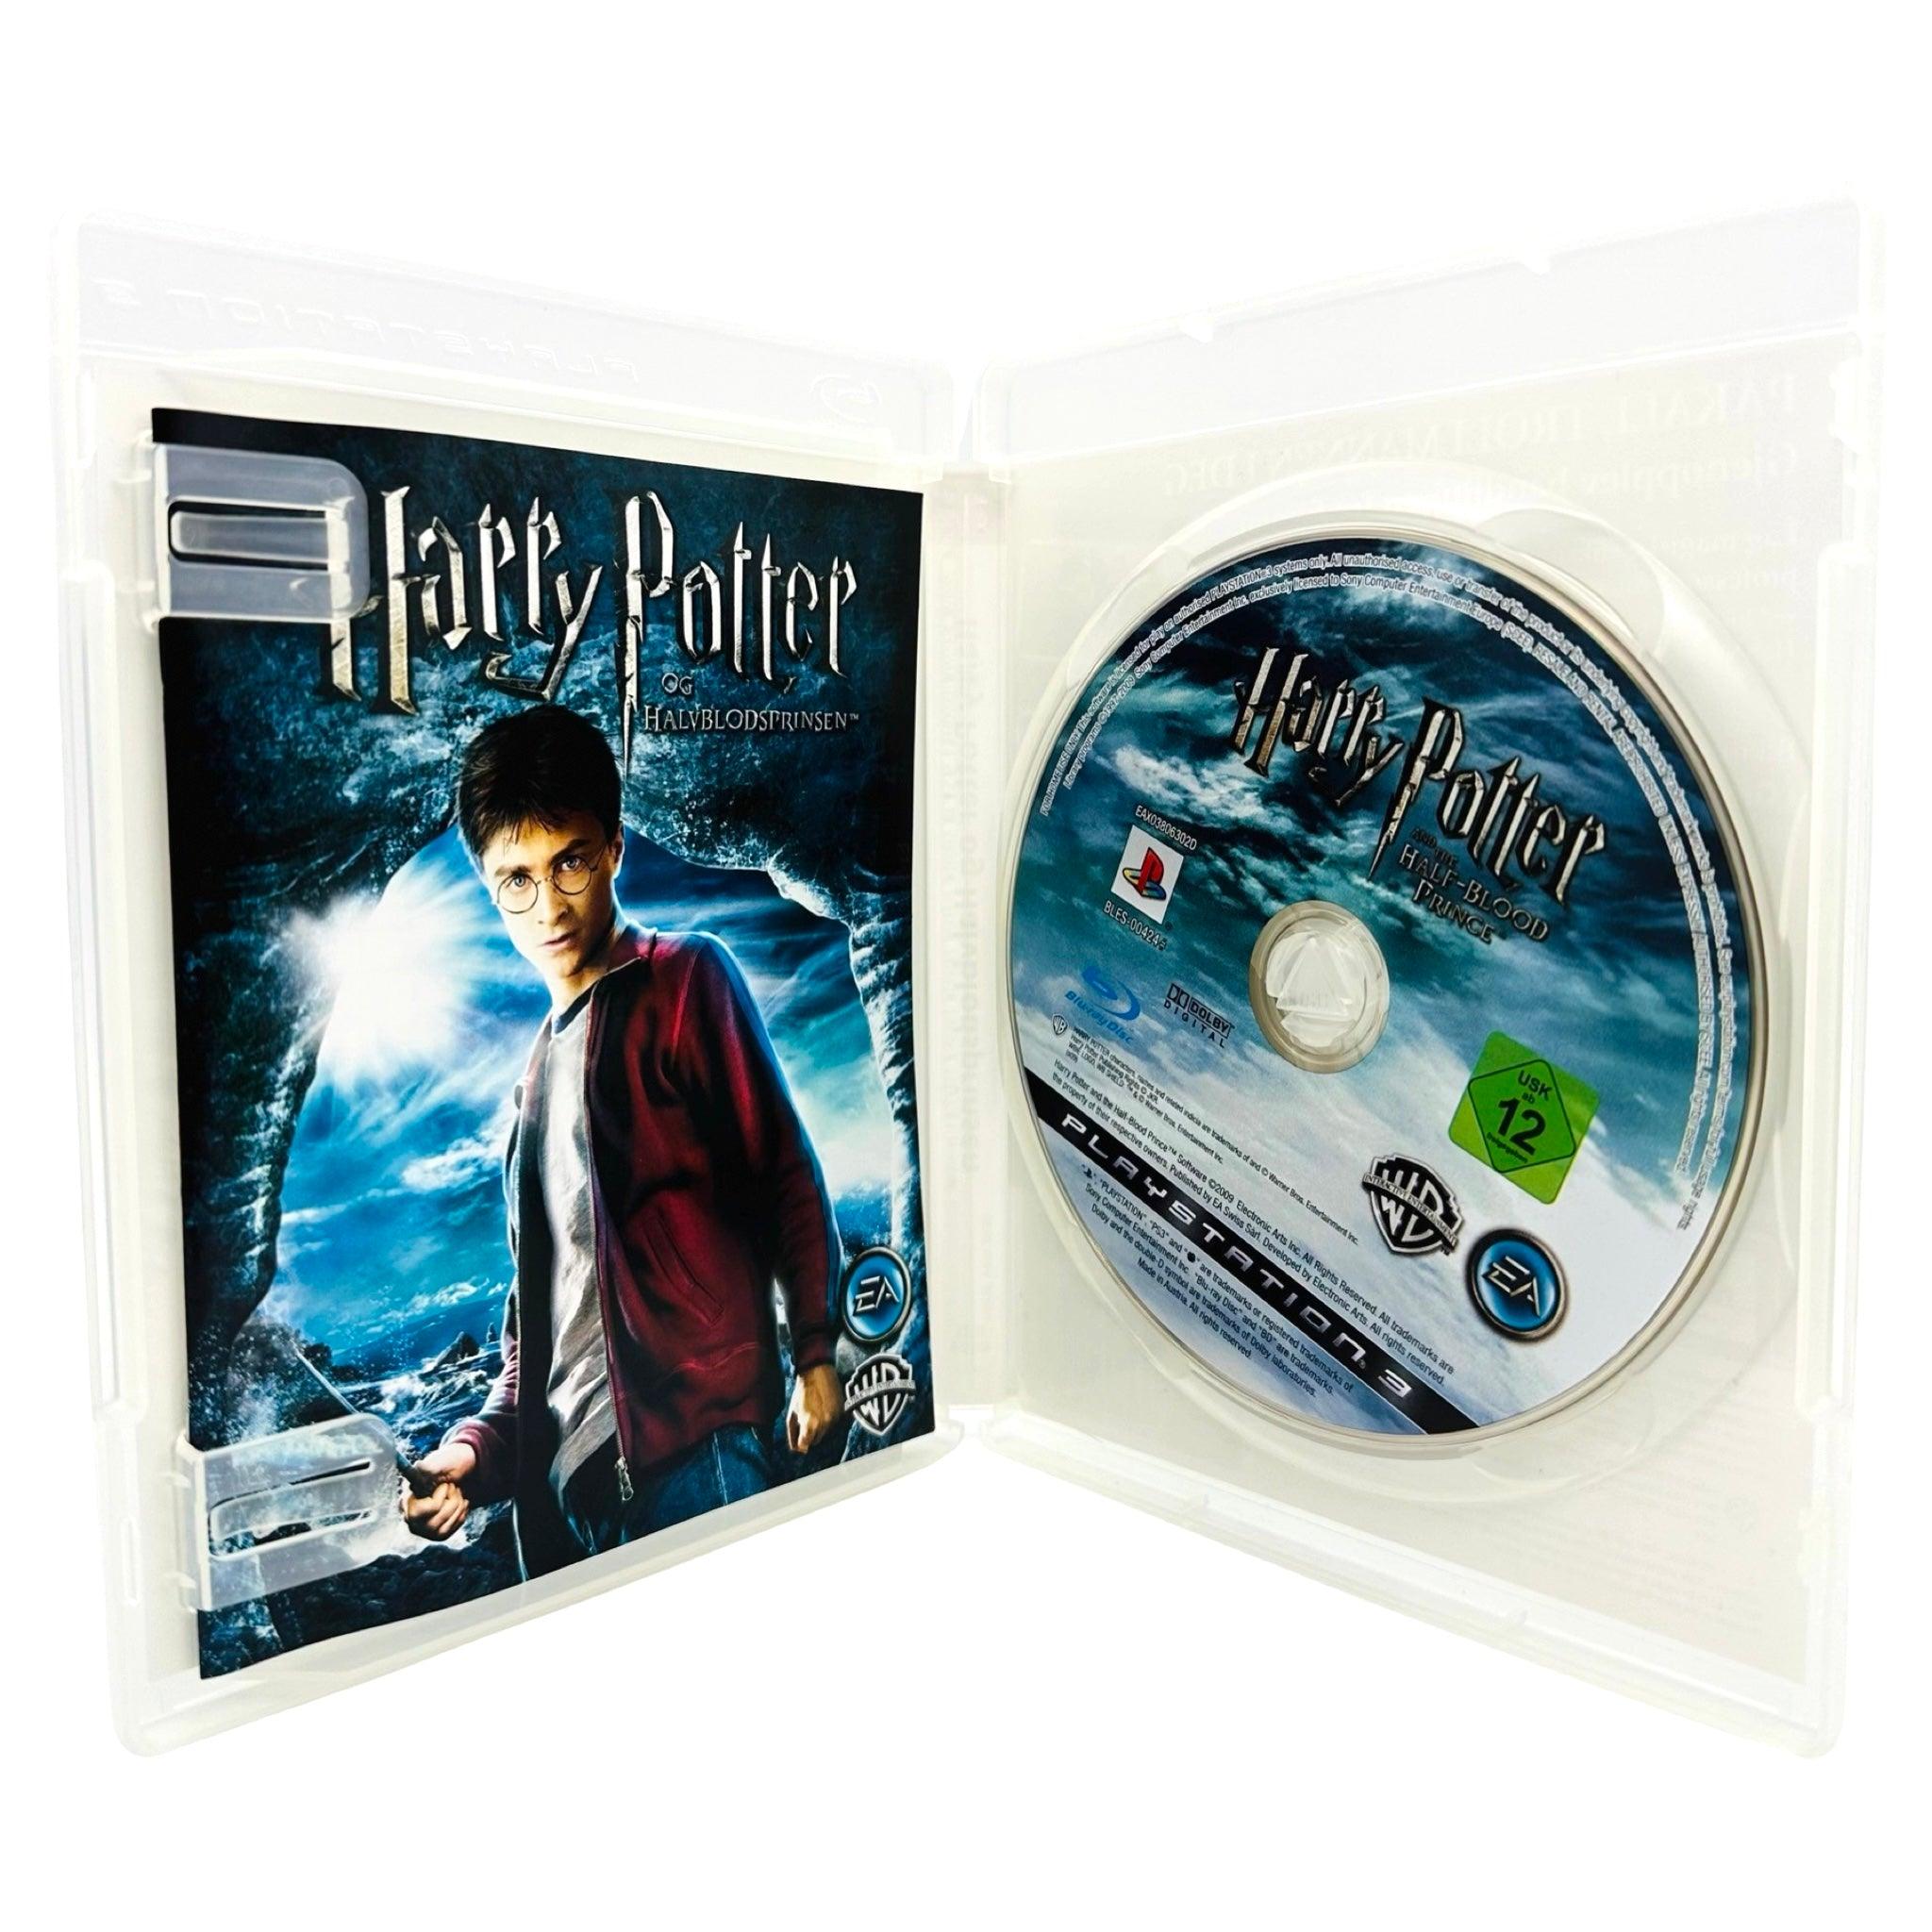 PS3: Harry Potter And The Half-Blood Prince - RetroGaming.no